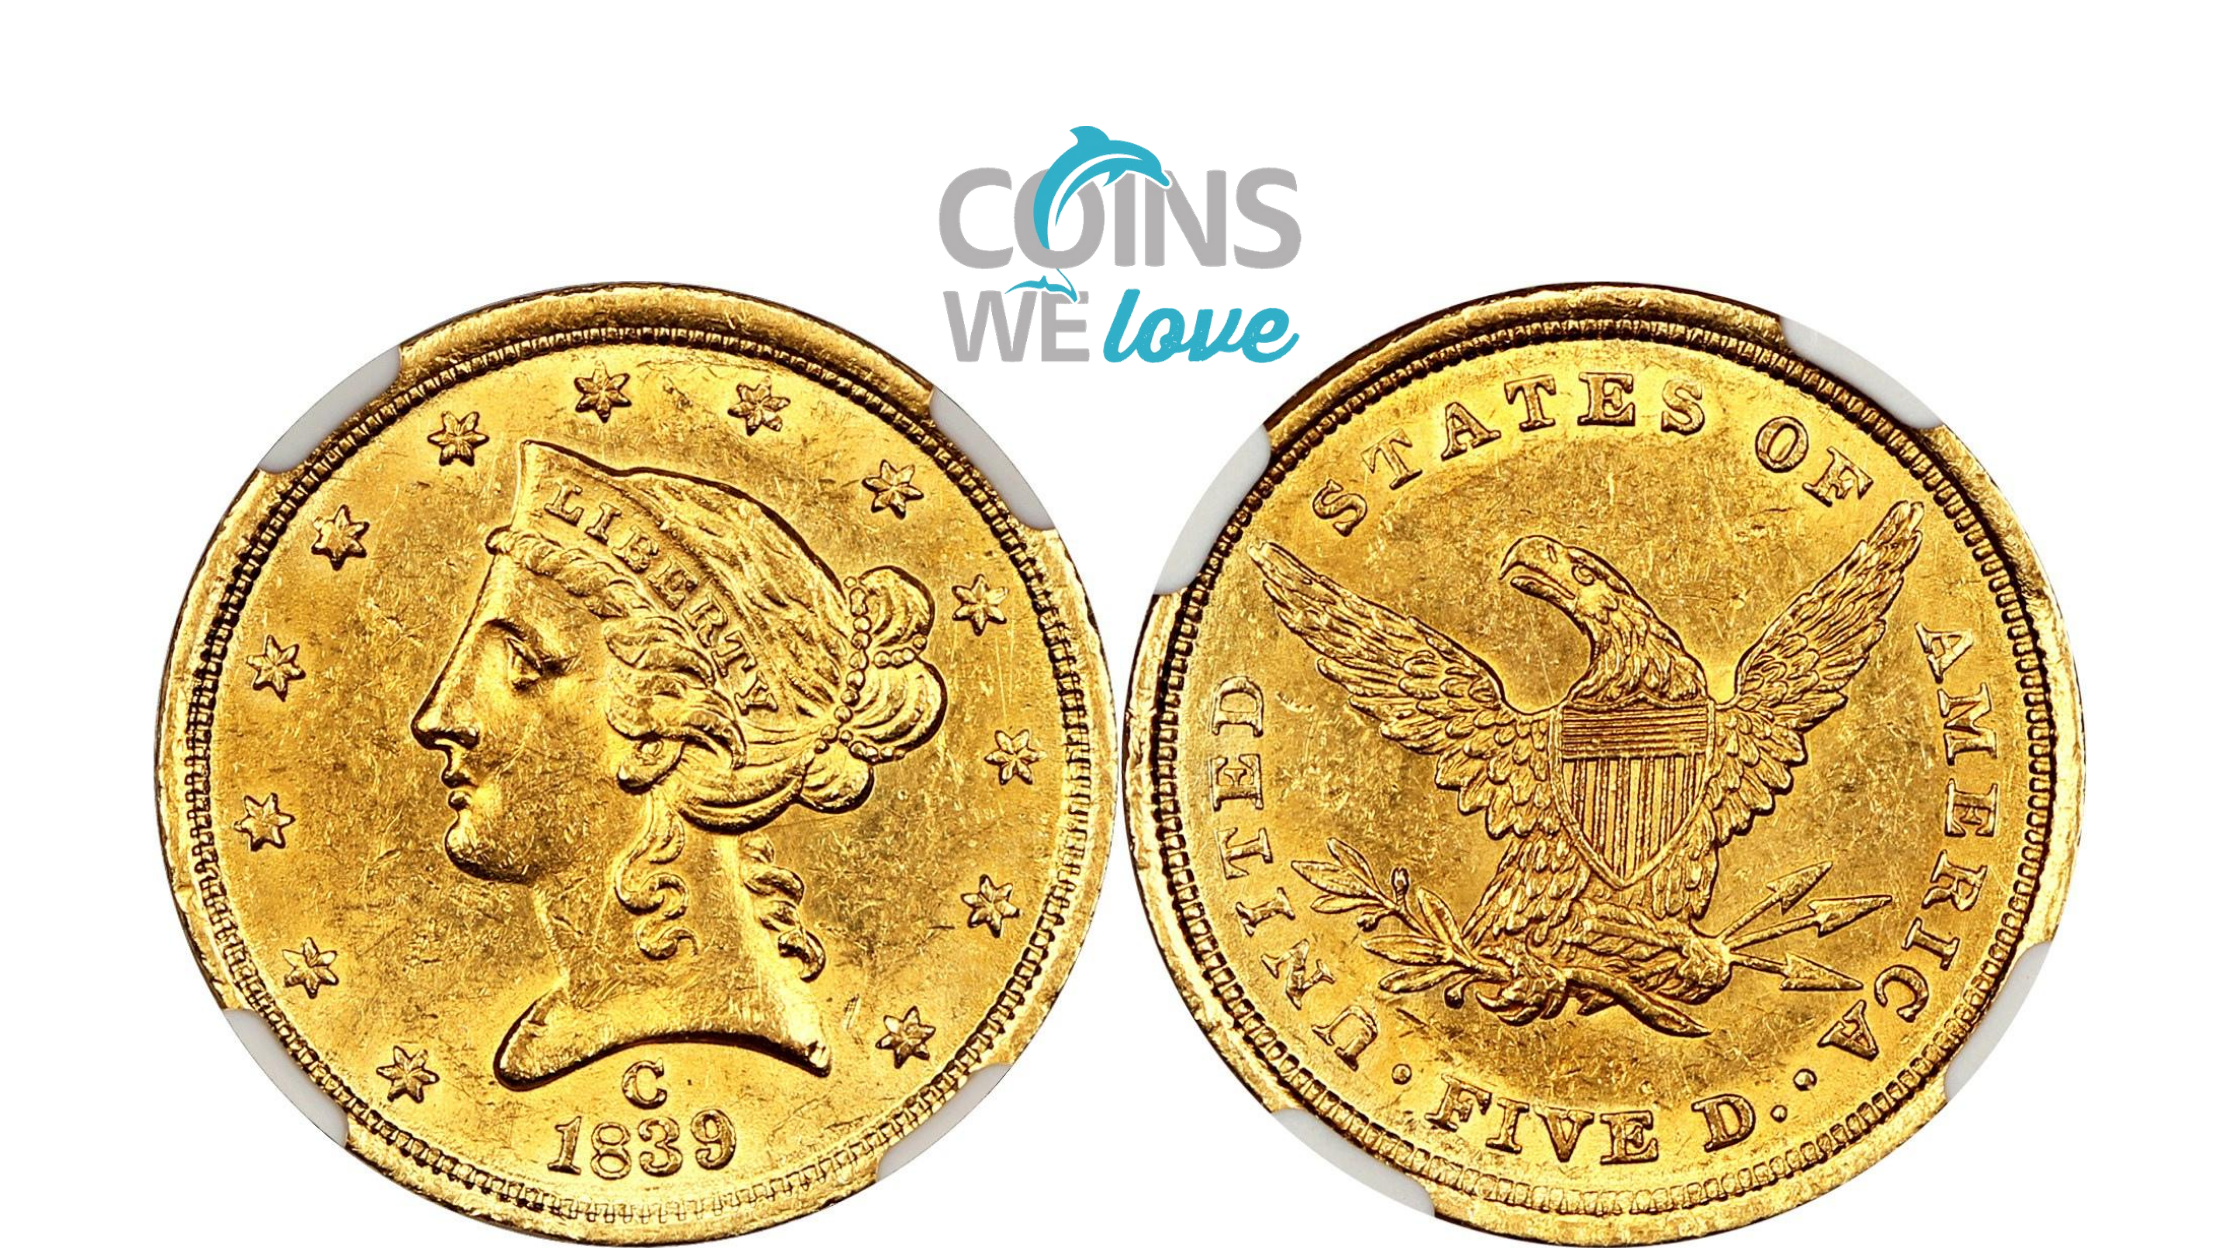 Coins We Love: Weathering the Storms